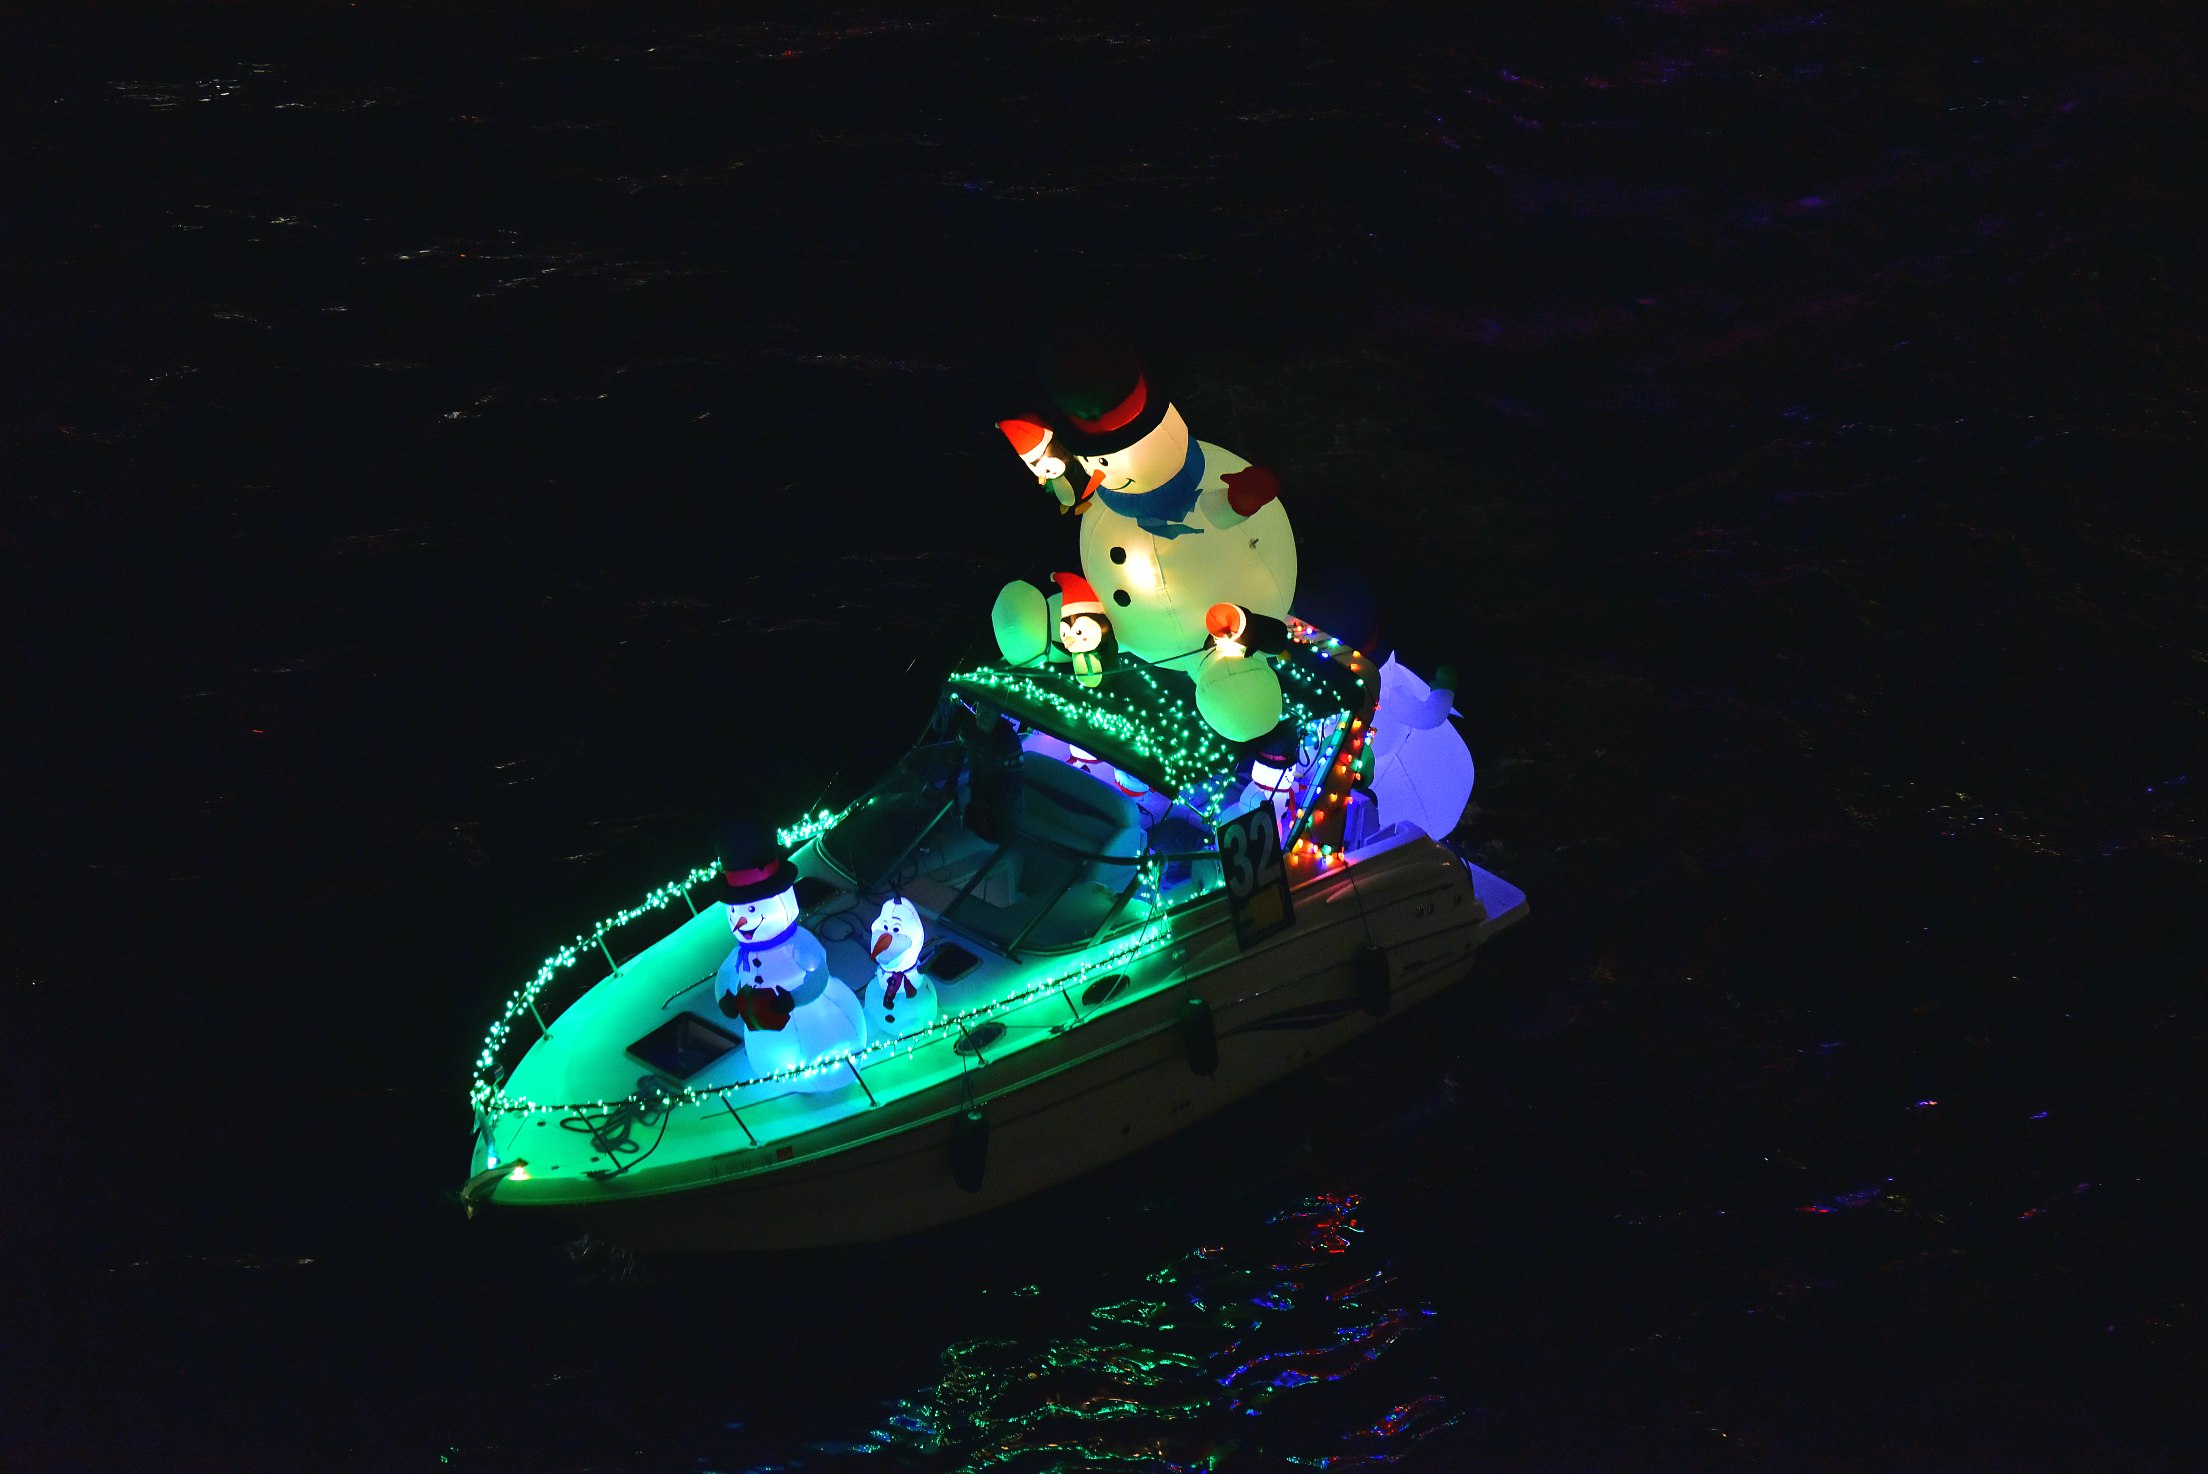 Dunn Deal, boat number 32 in the 2021 Winterfest Boat Parade